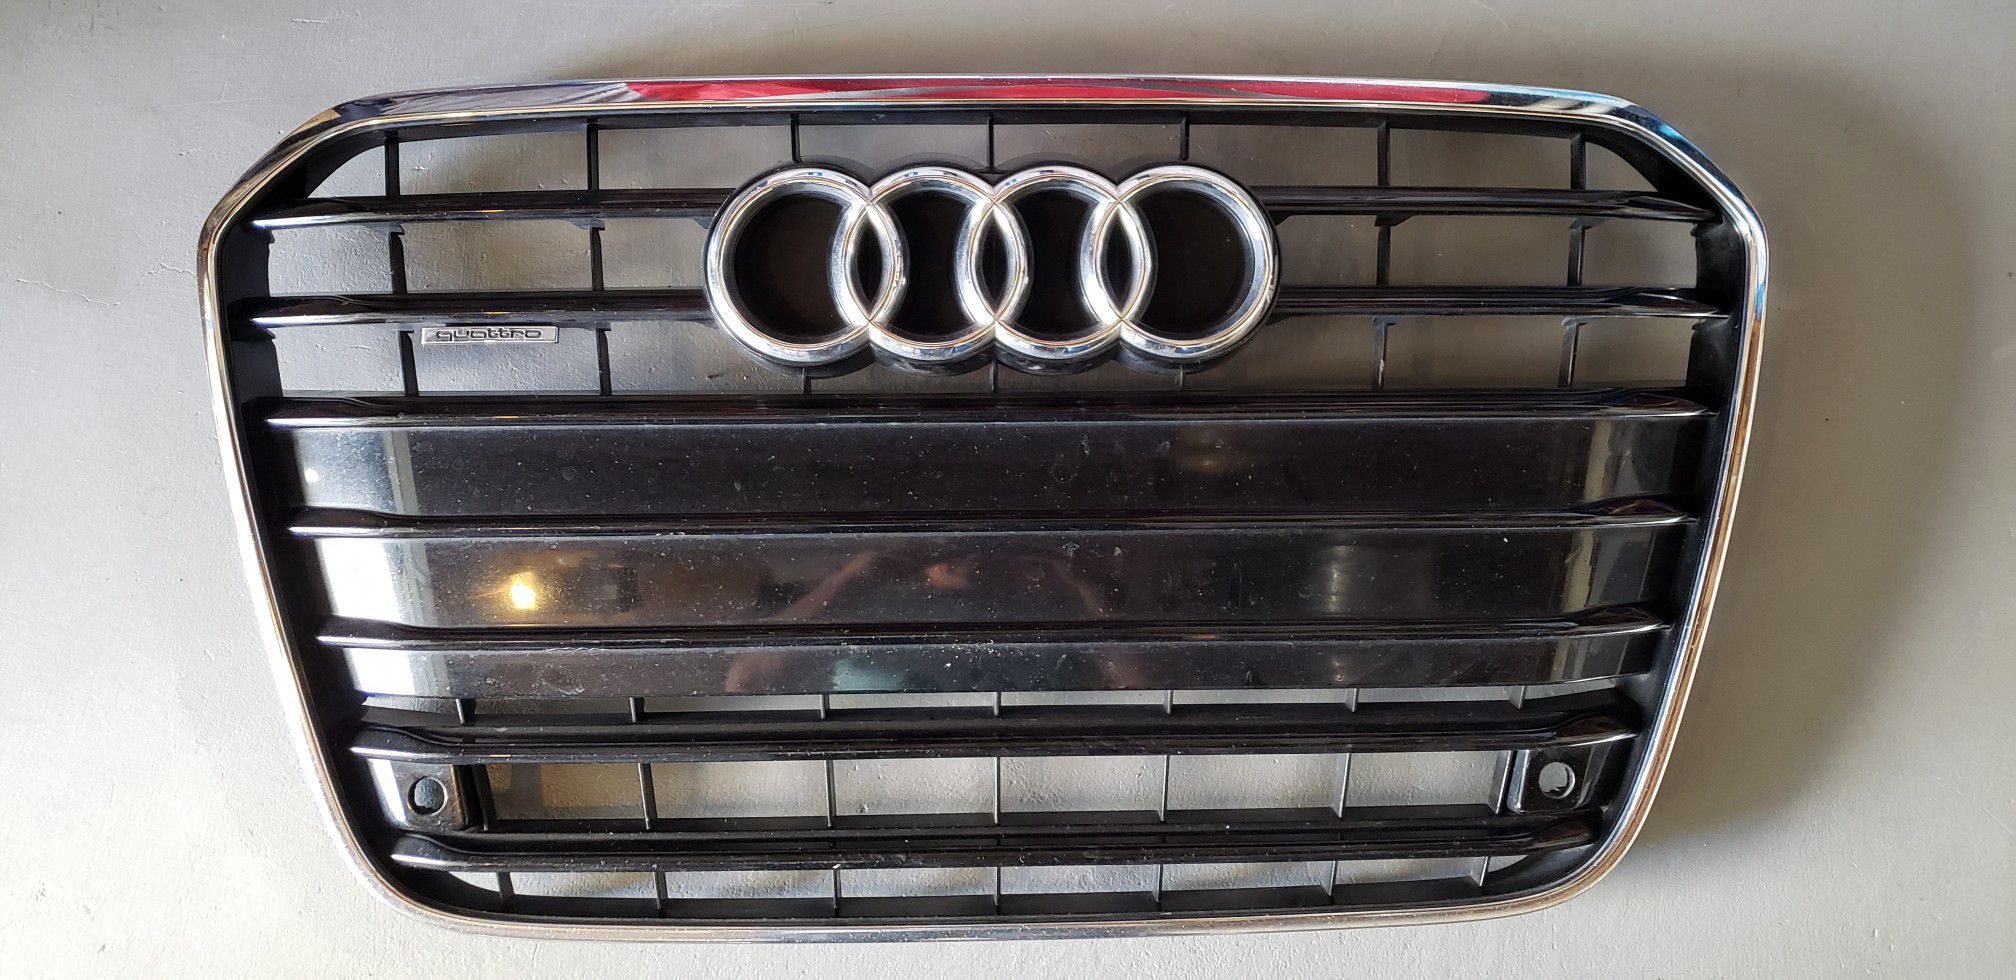 2012 2013 2014 2015 AUDI A6 FRONT GRILL OEM USED 4G0 853 037